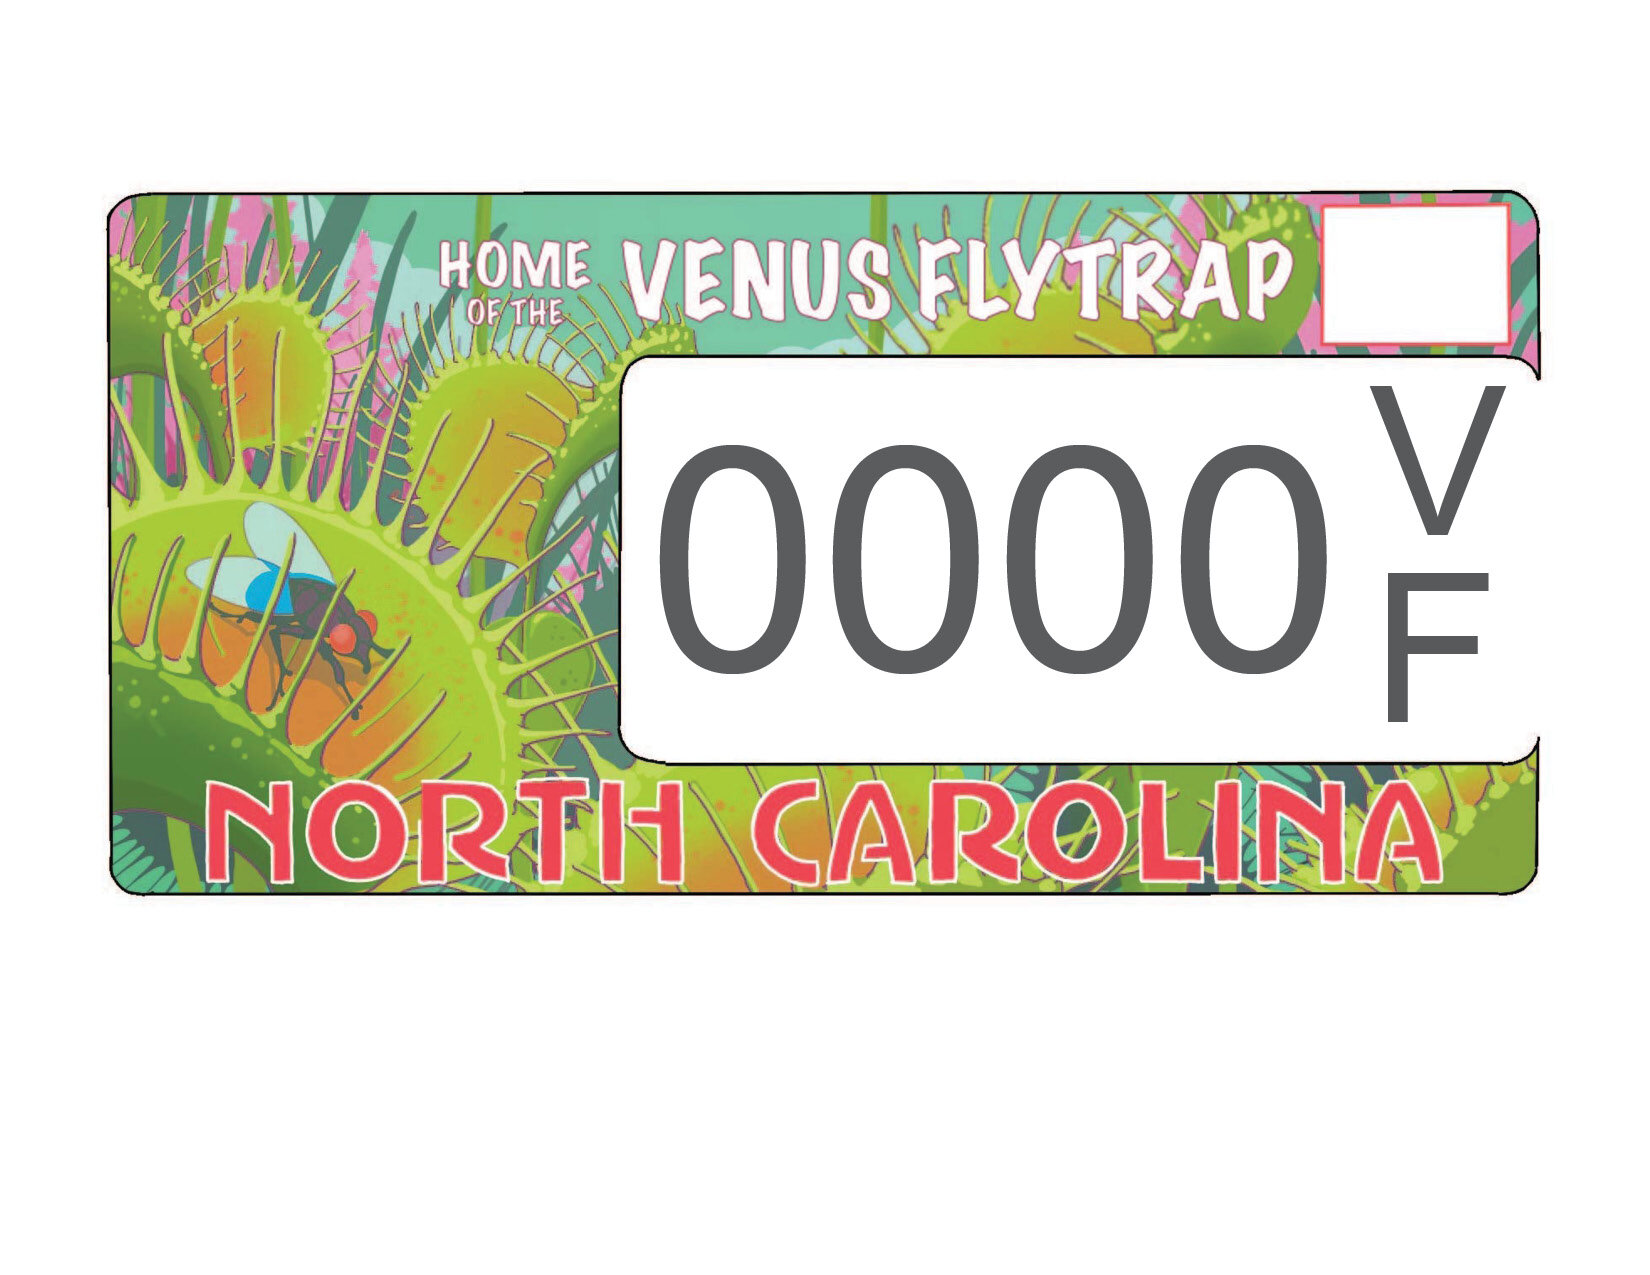 Home of the Venus Fly Trap